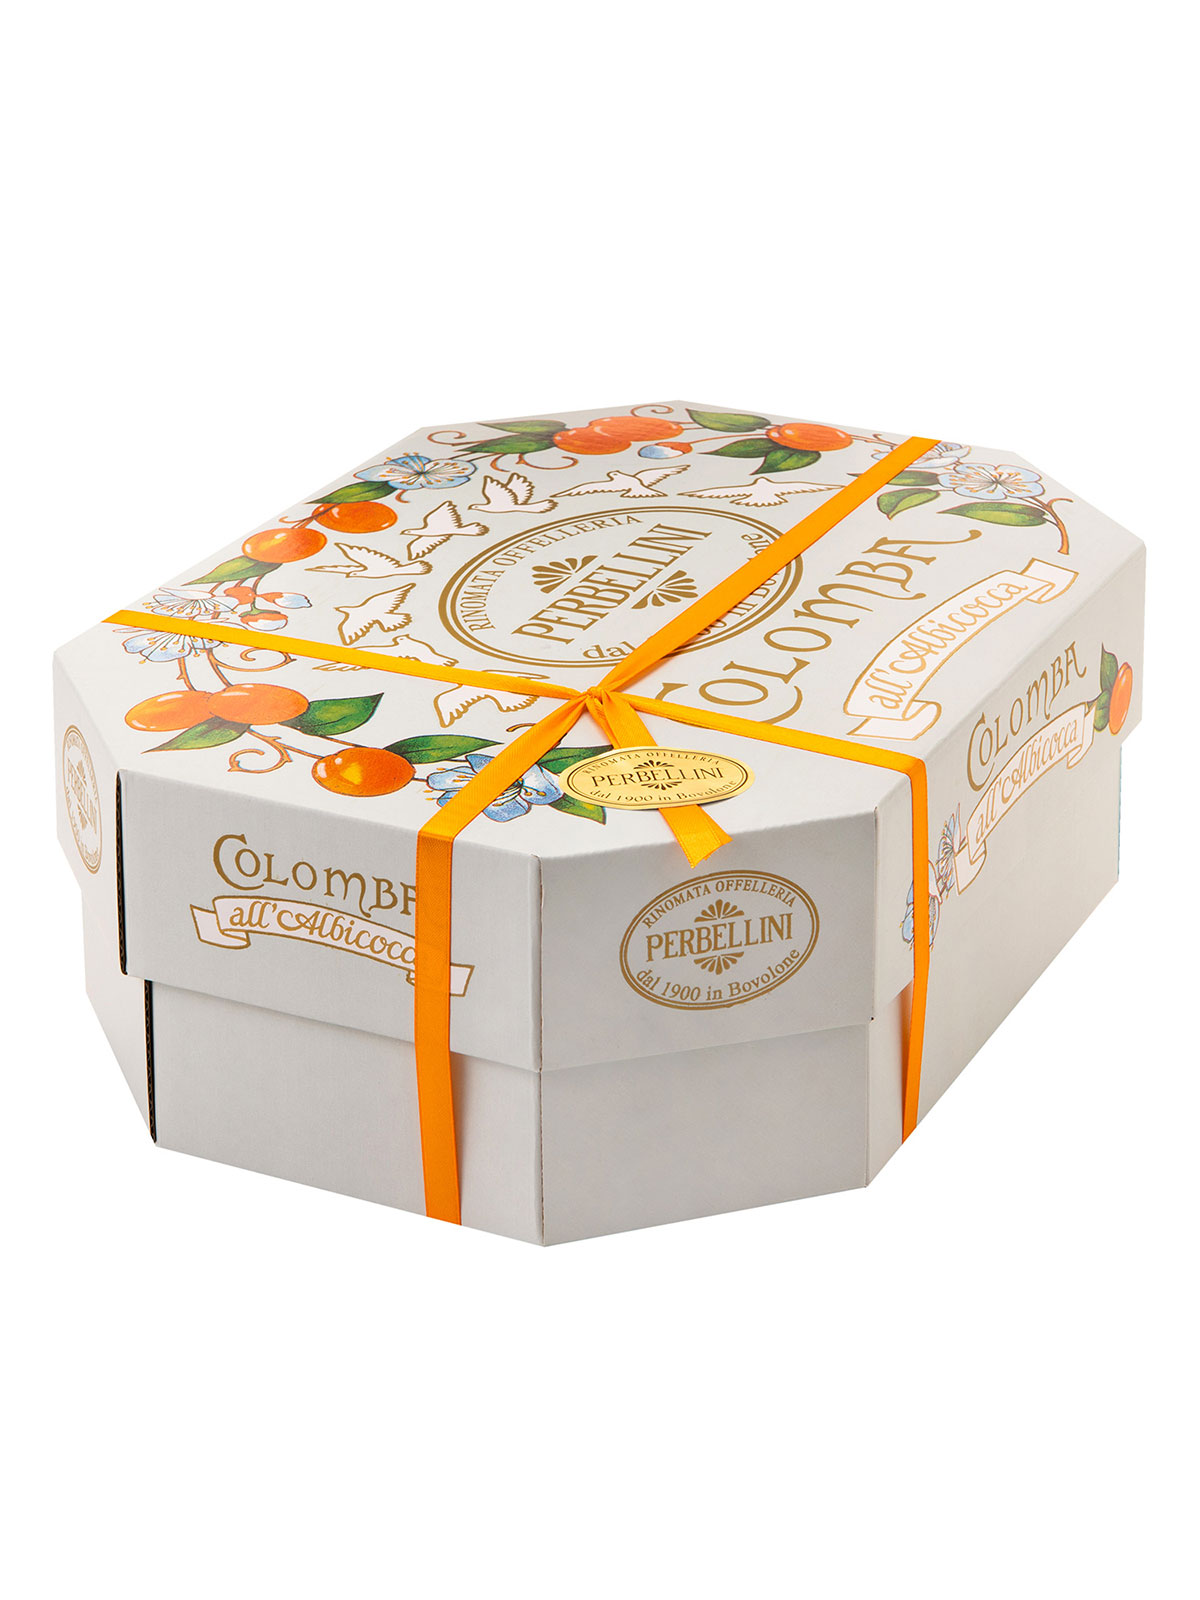 PERBELLINI COLOMBA WITH APRICOT 880 GR